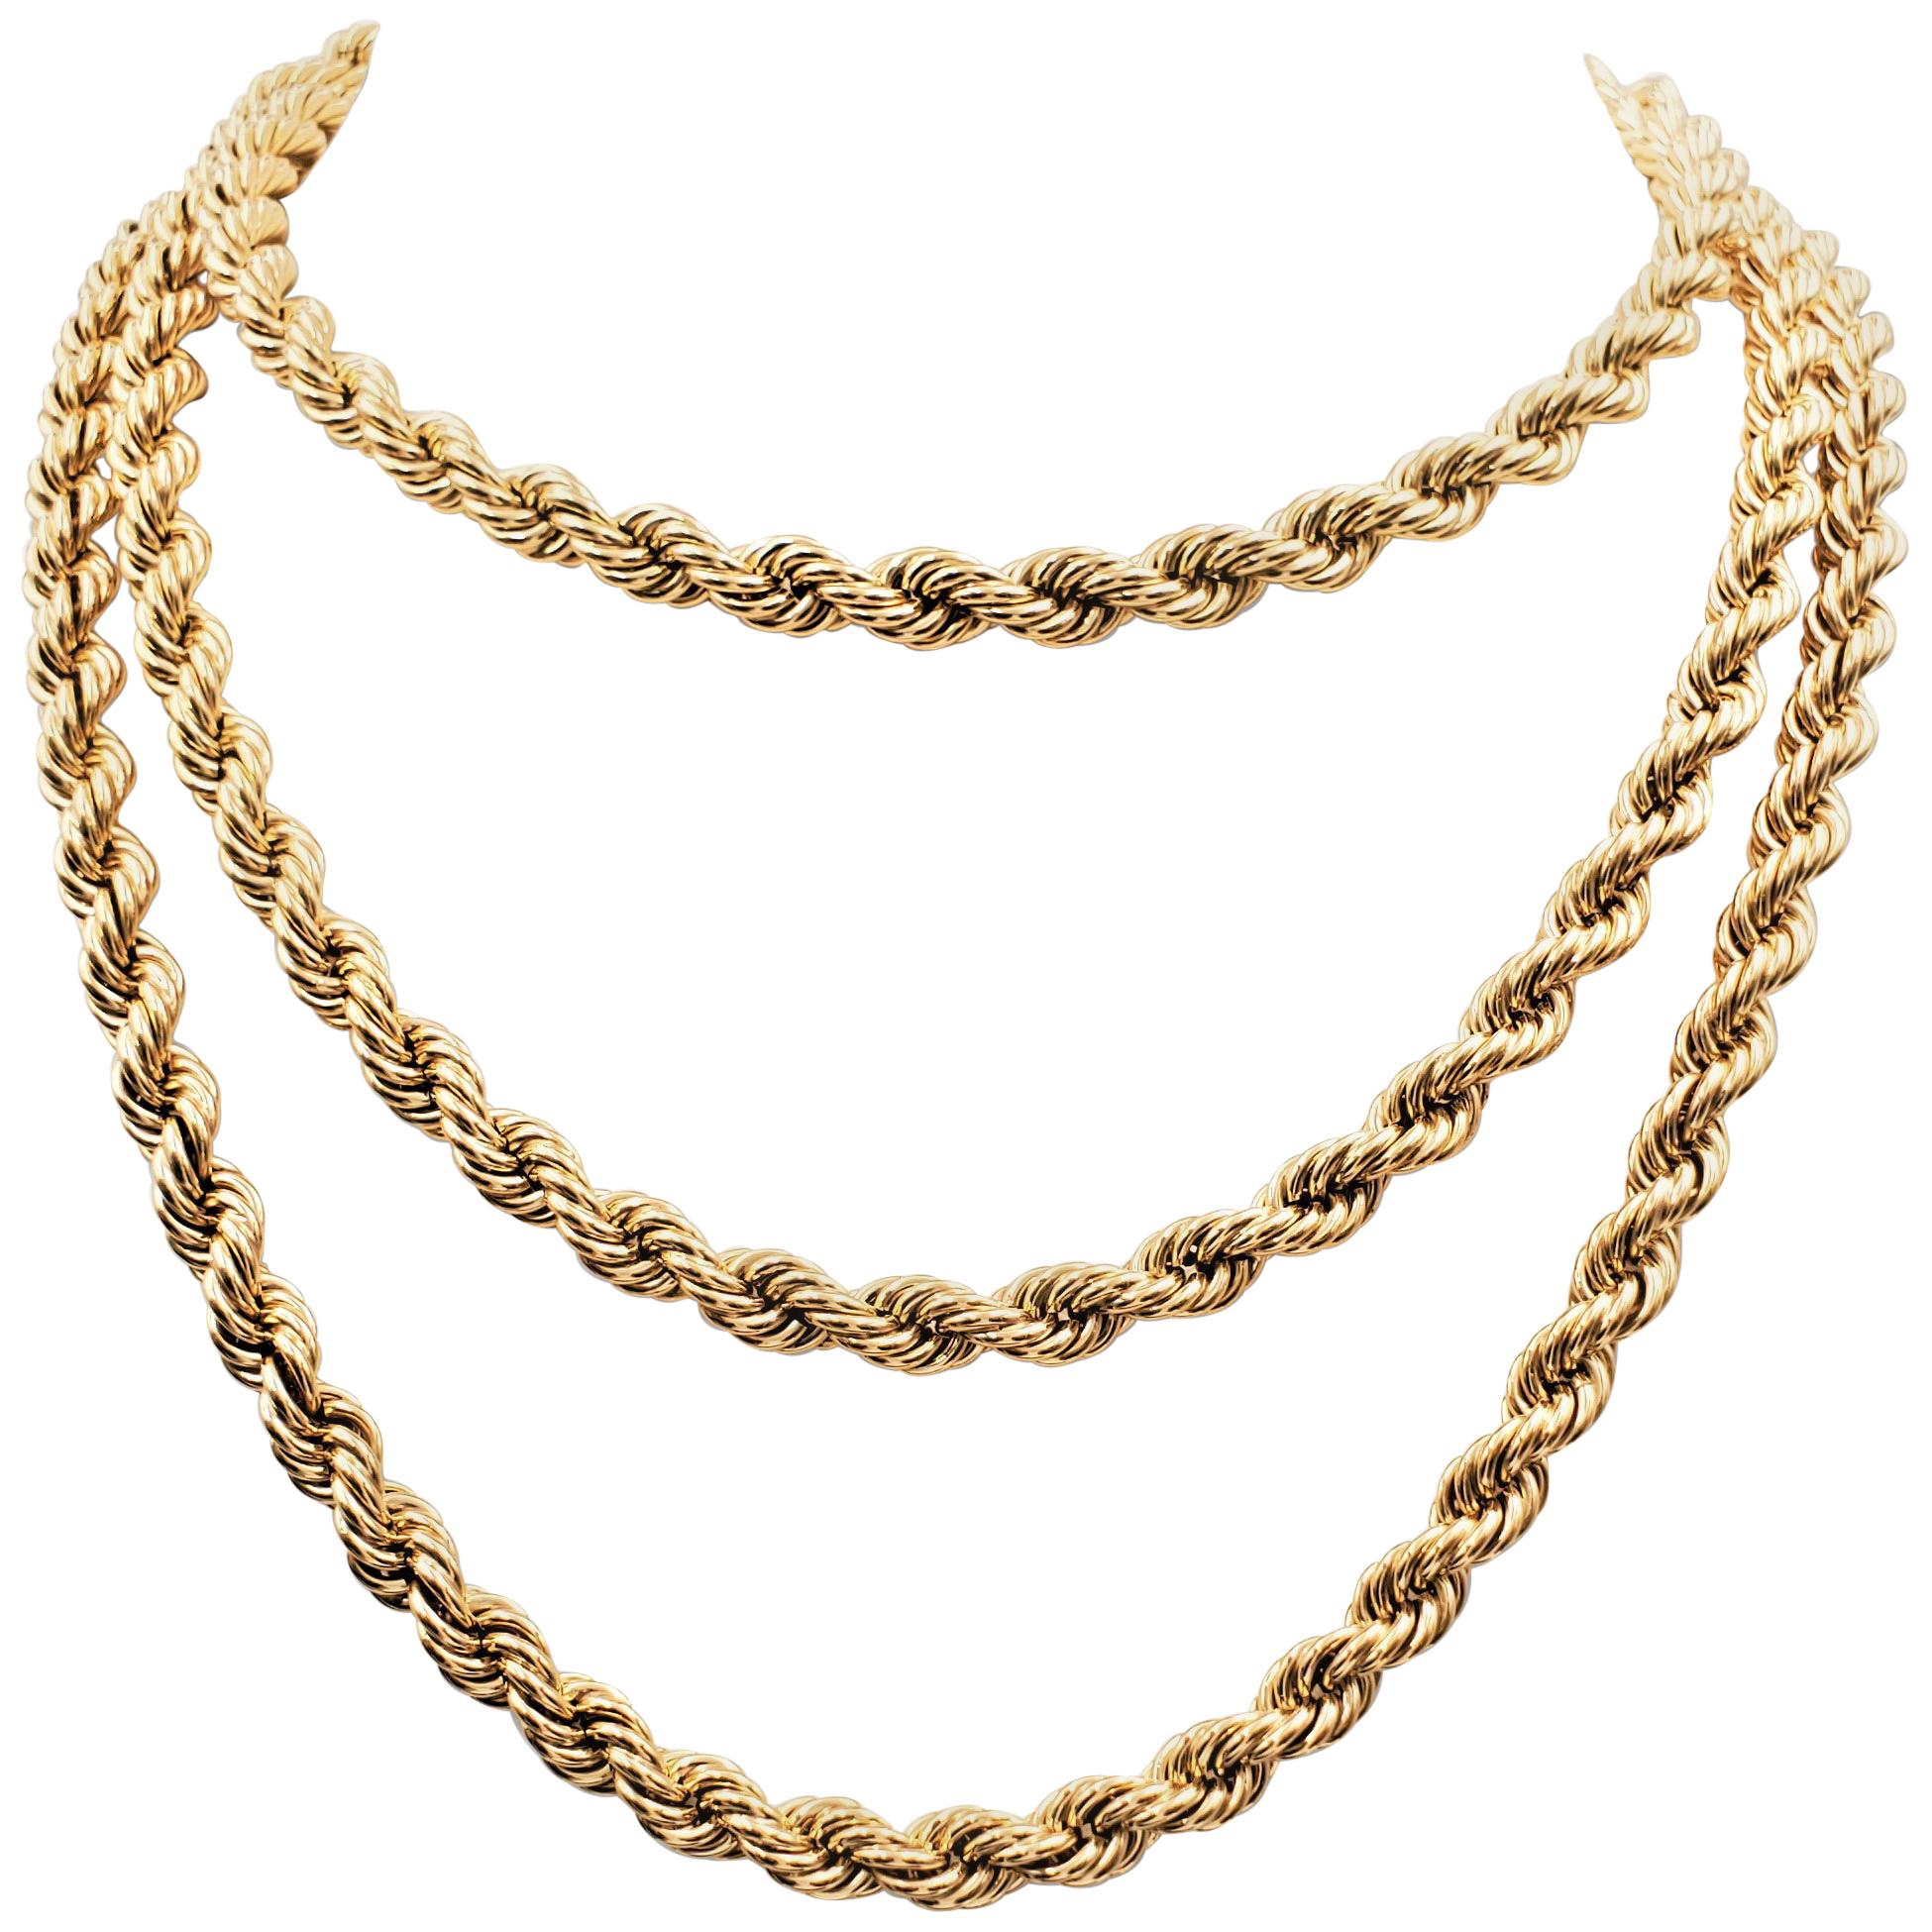 Vintage Tiffany & Co. Yellow Gold Twisted Rope Chain Necklace